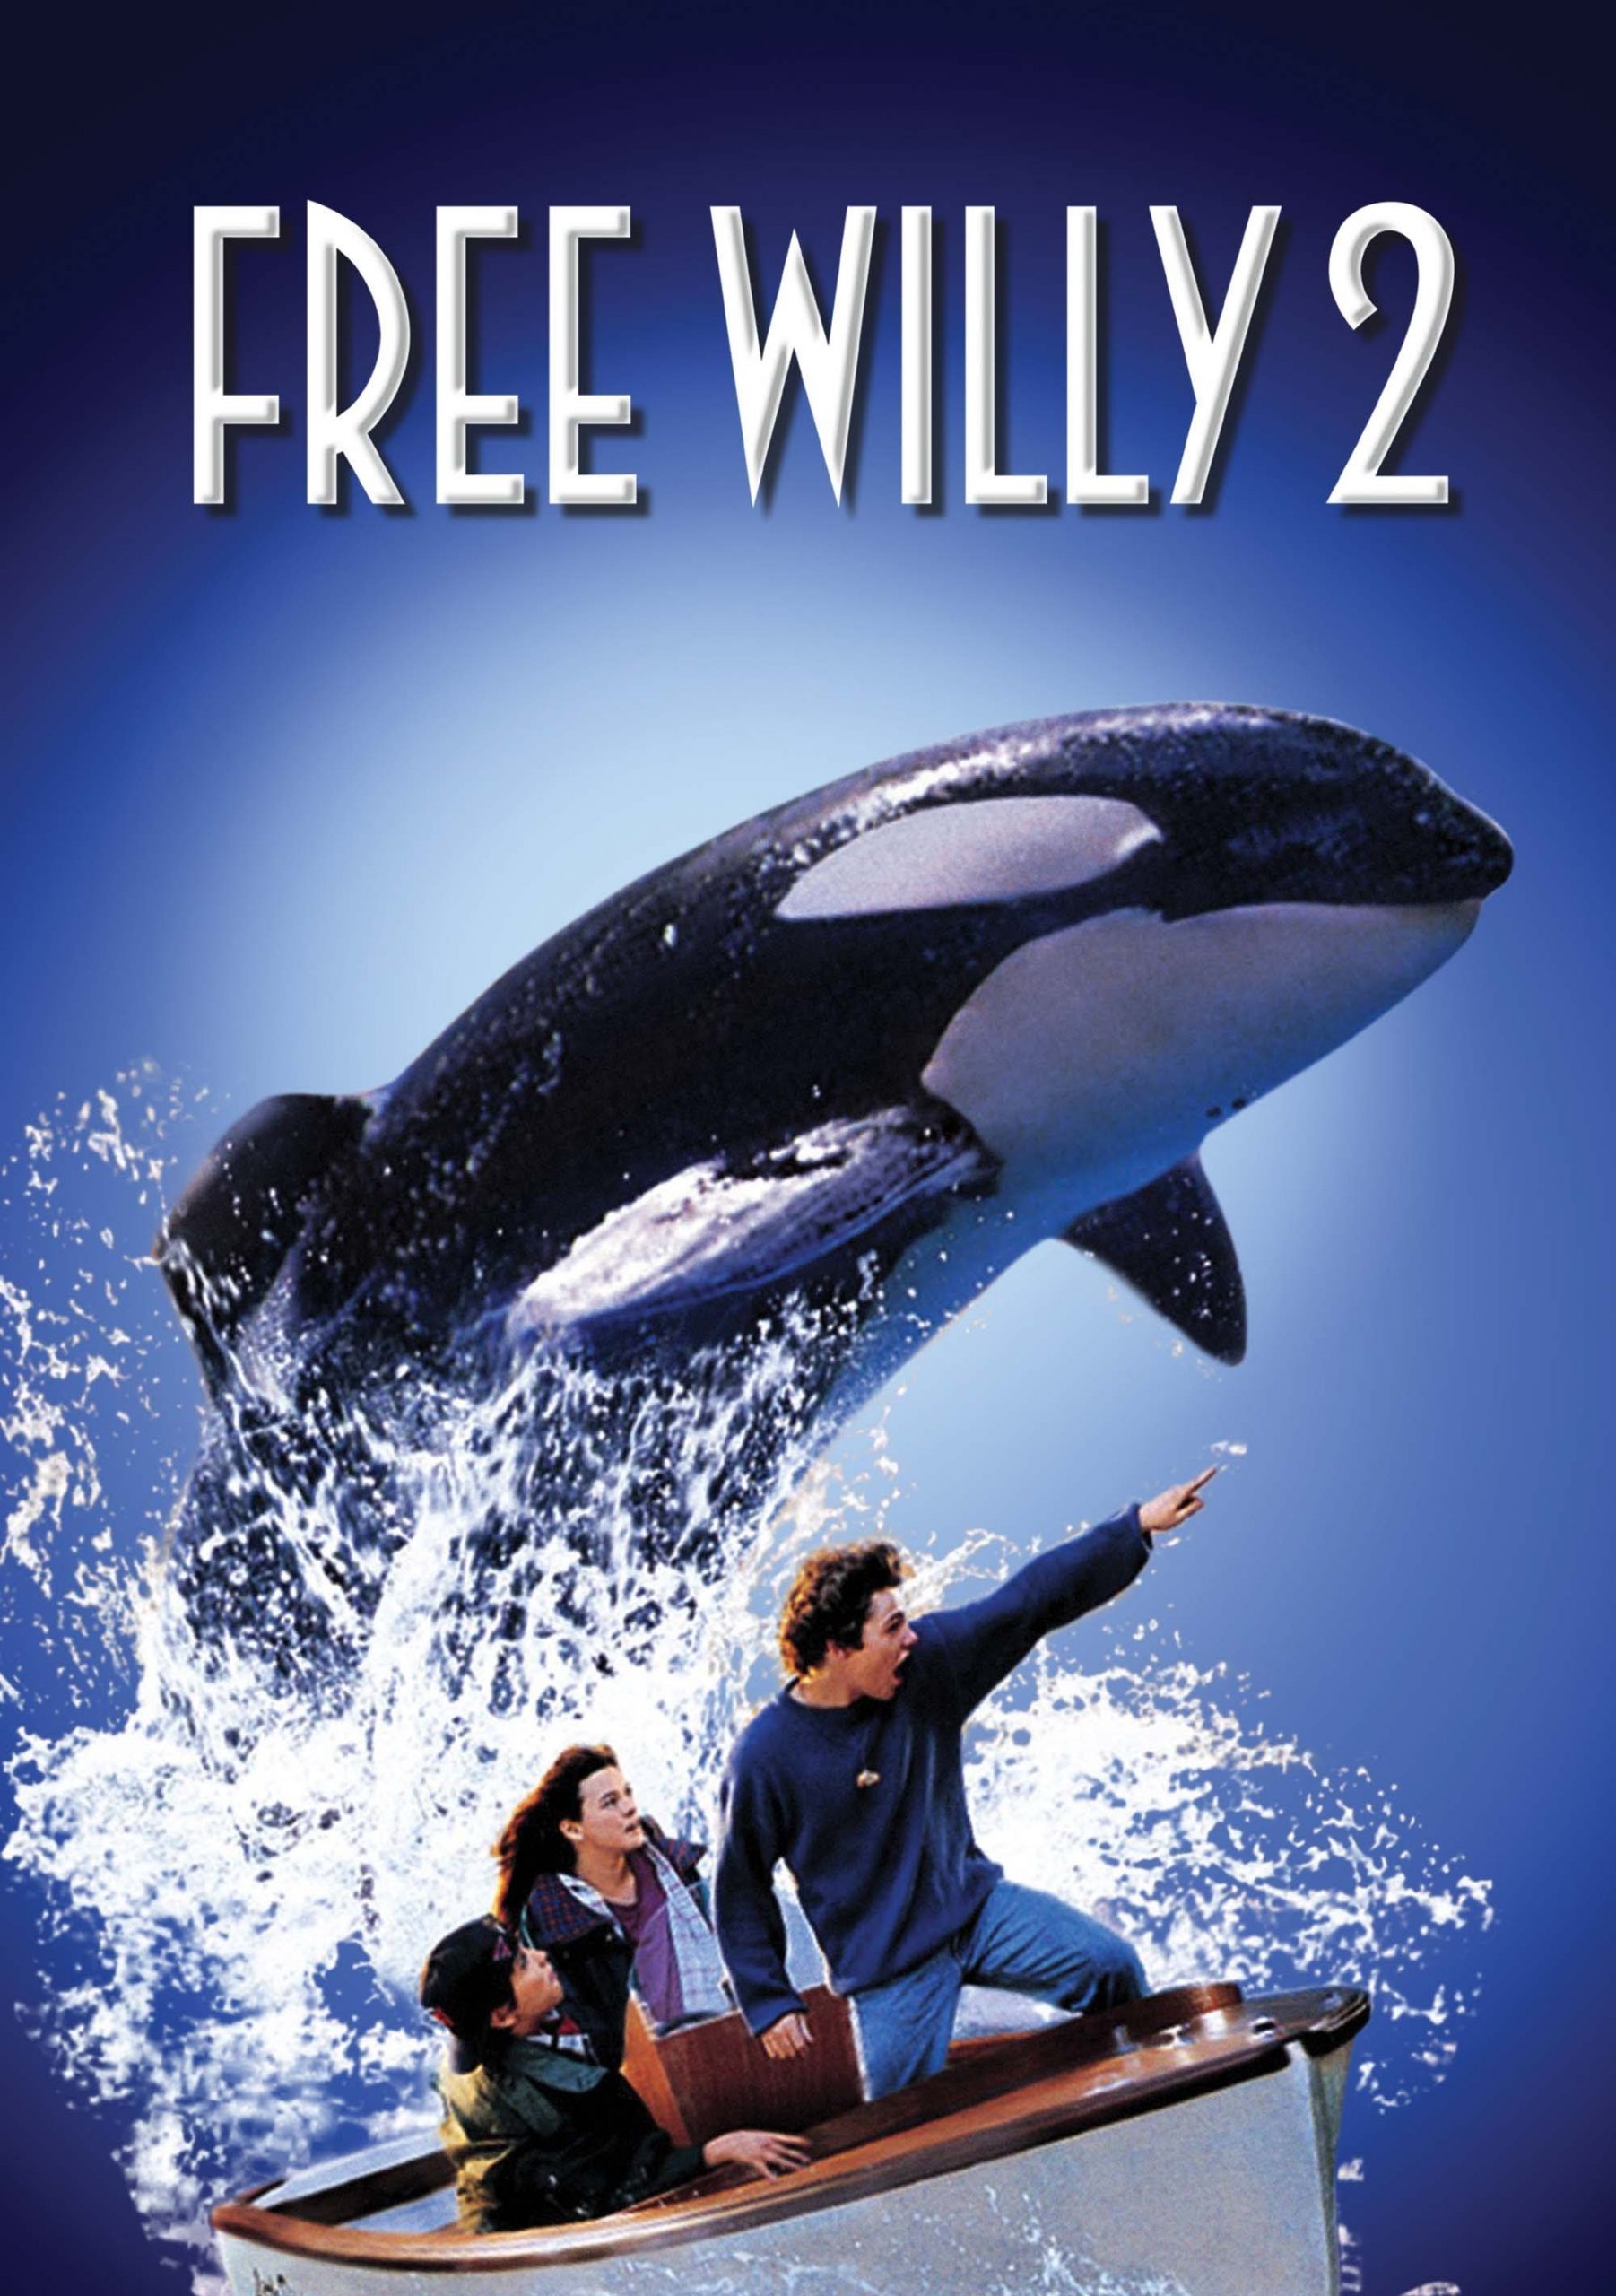 Free Willy 2 (1995)